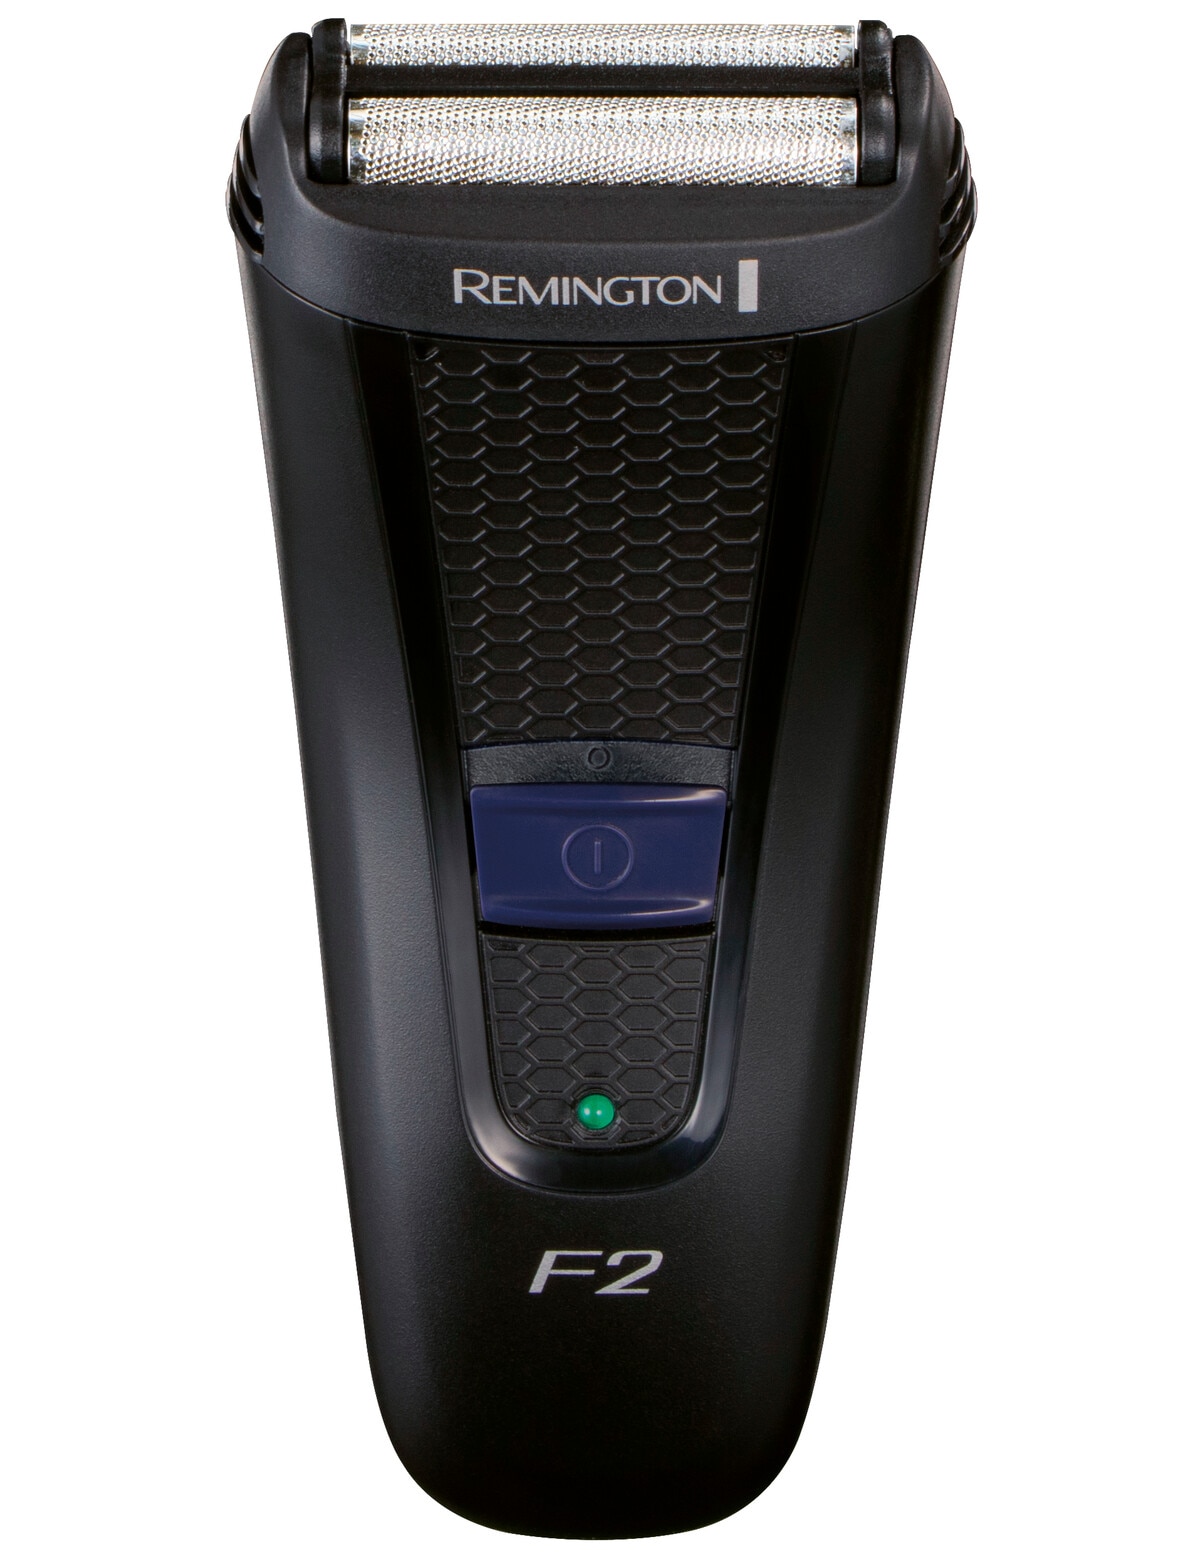 Remington F4 Style Series Electric Shaver with Pop Up Trimmer and